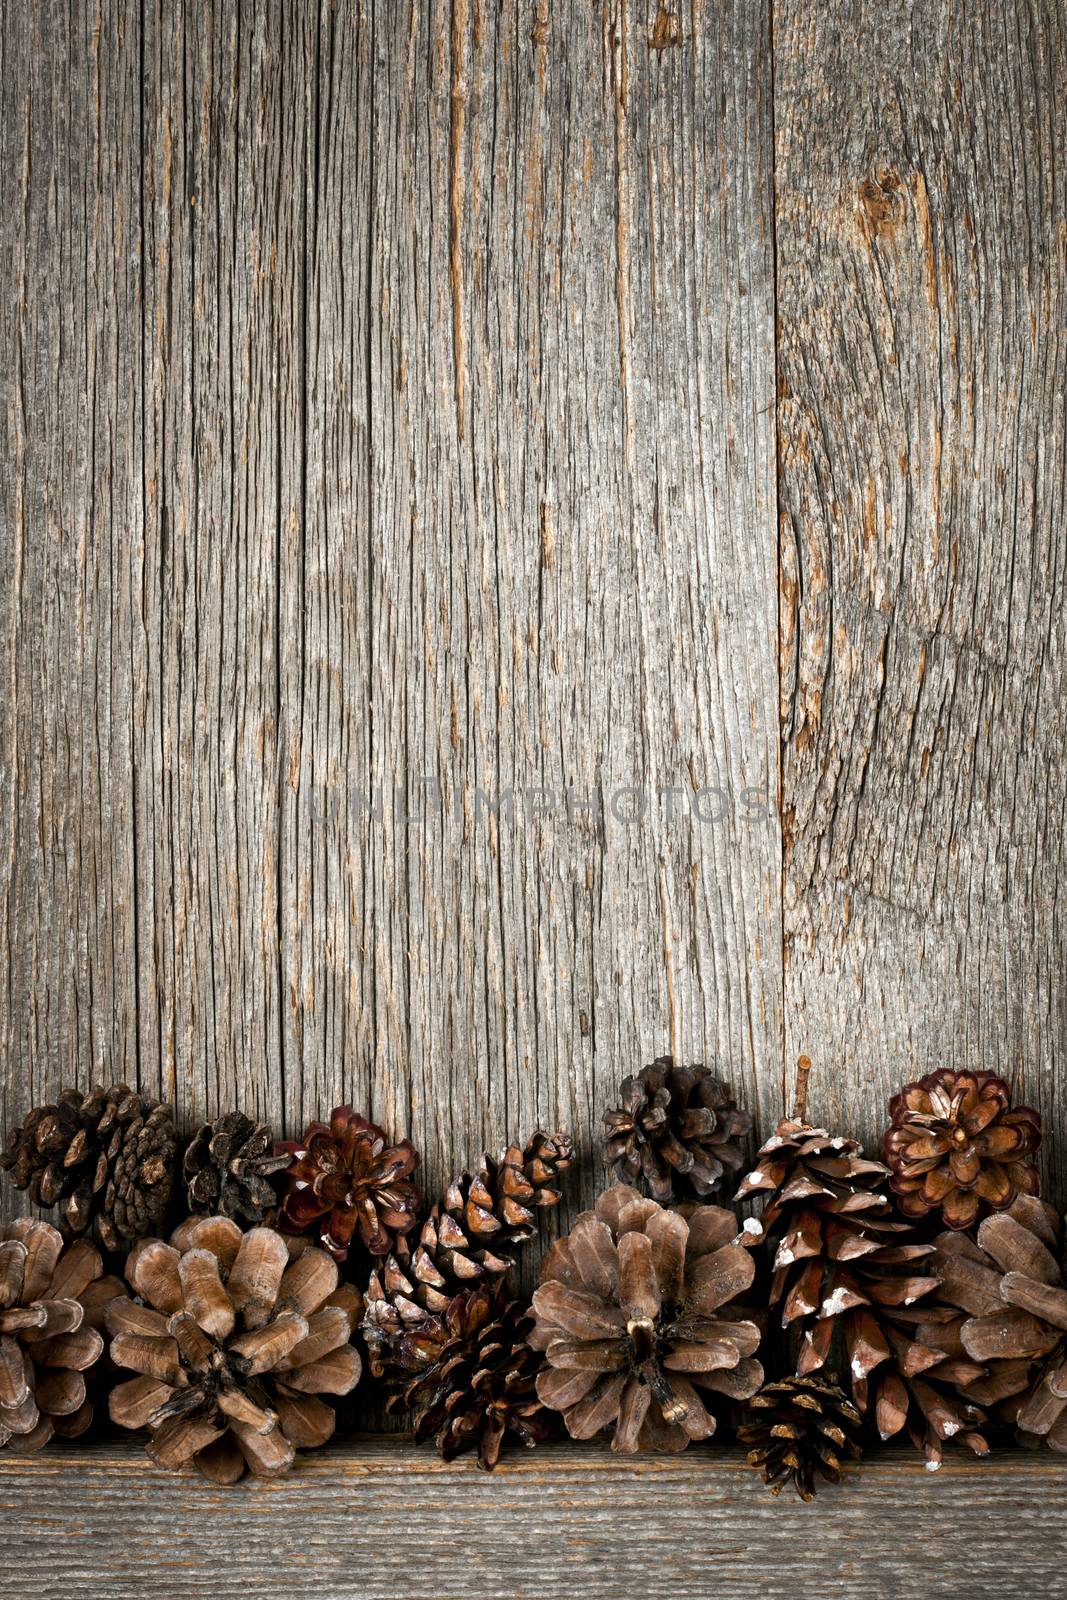 Rustic natural wooden background with pine cones